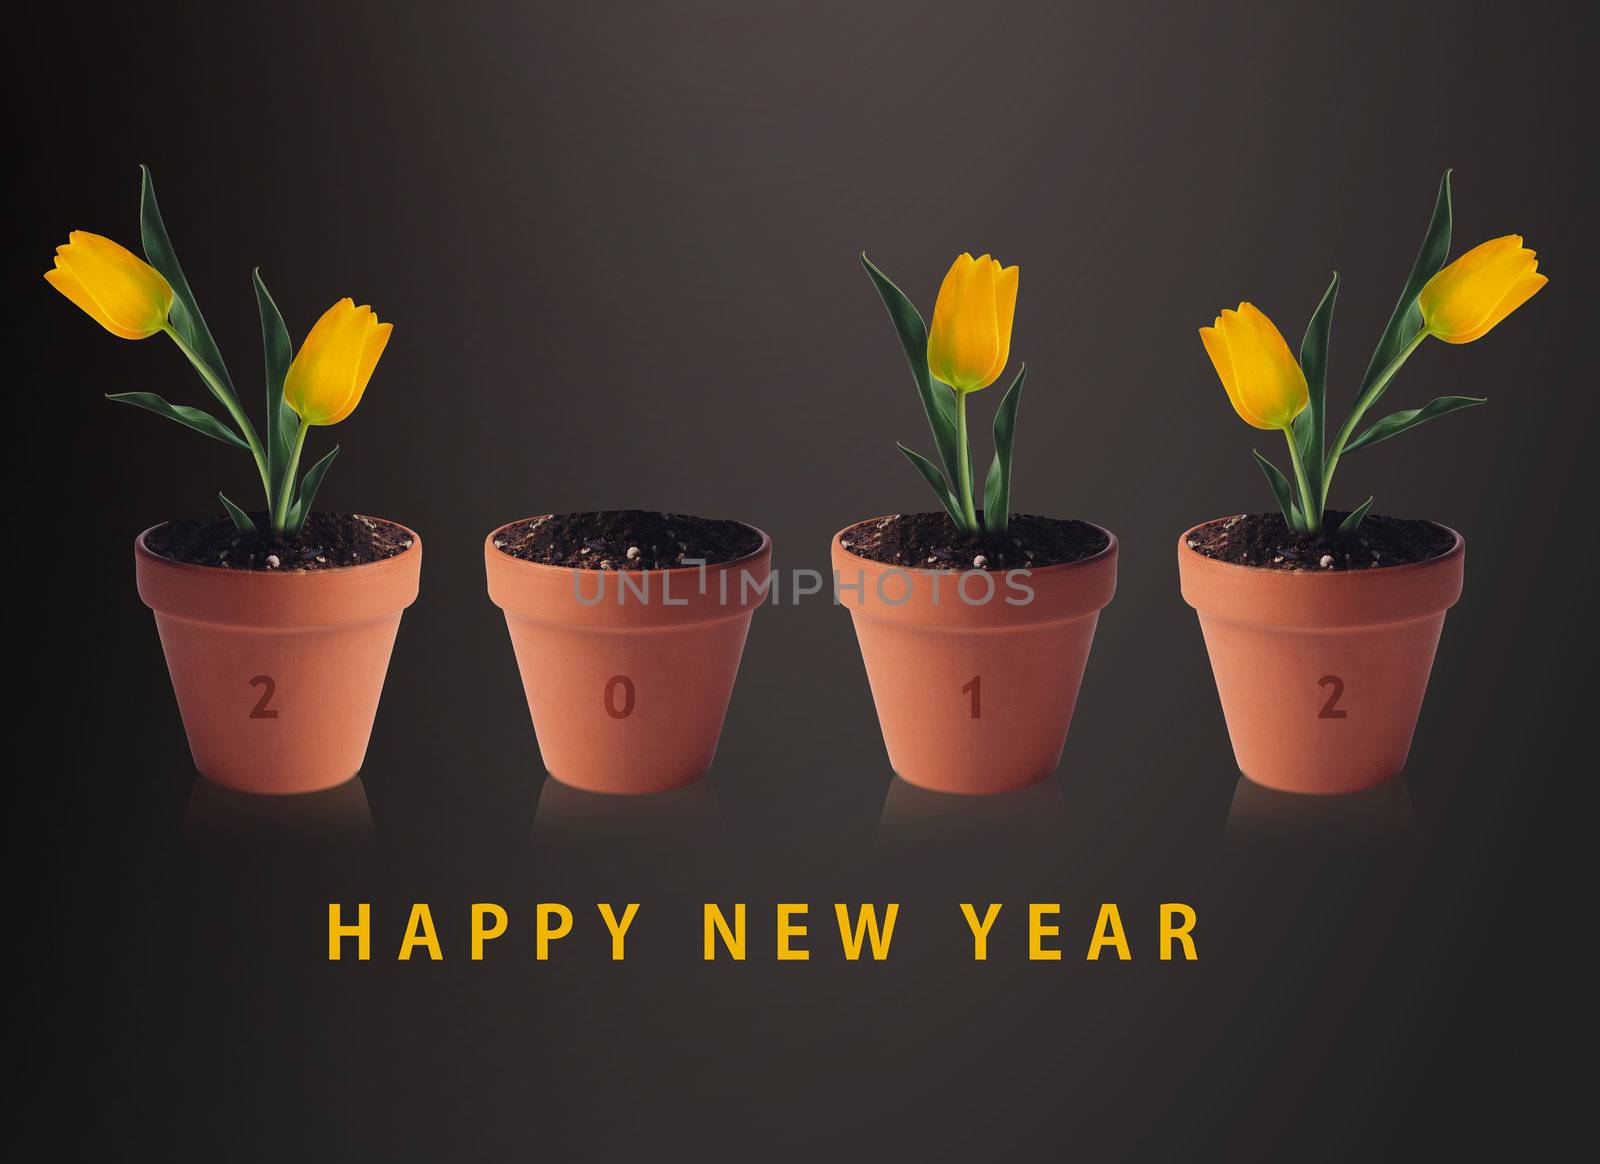 Happy new year 2012, conceptual image pots with yellow tulip flowers making 2012 year numbers.